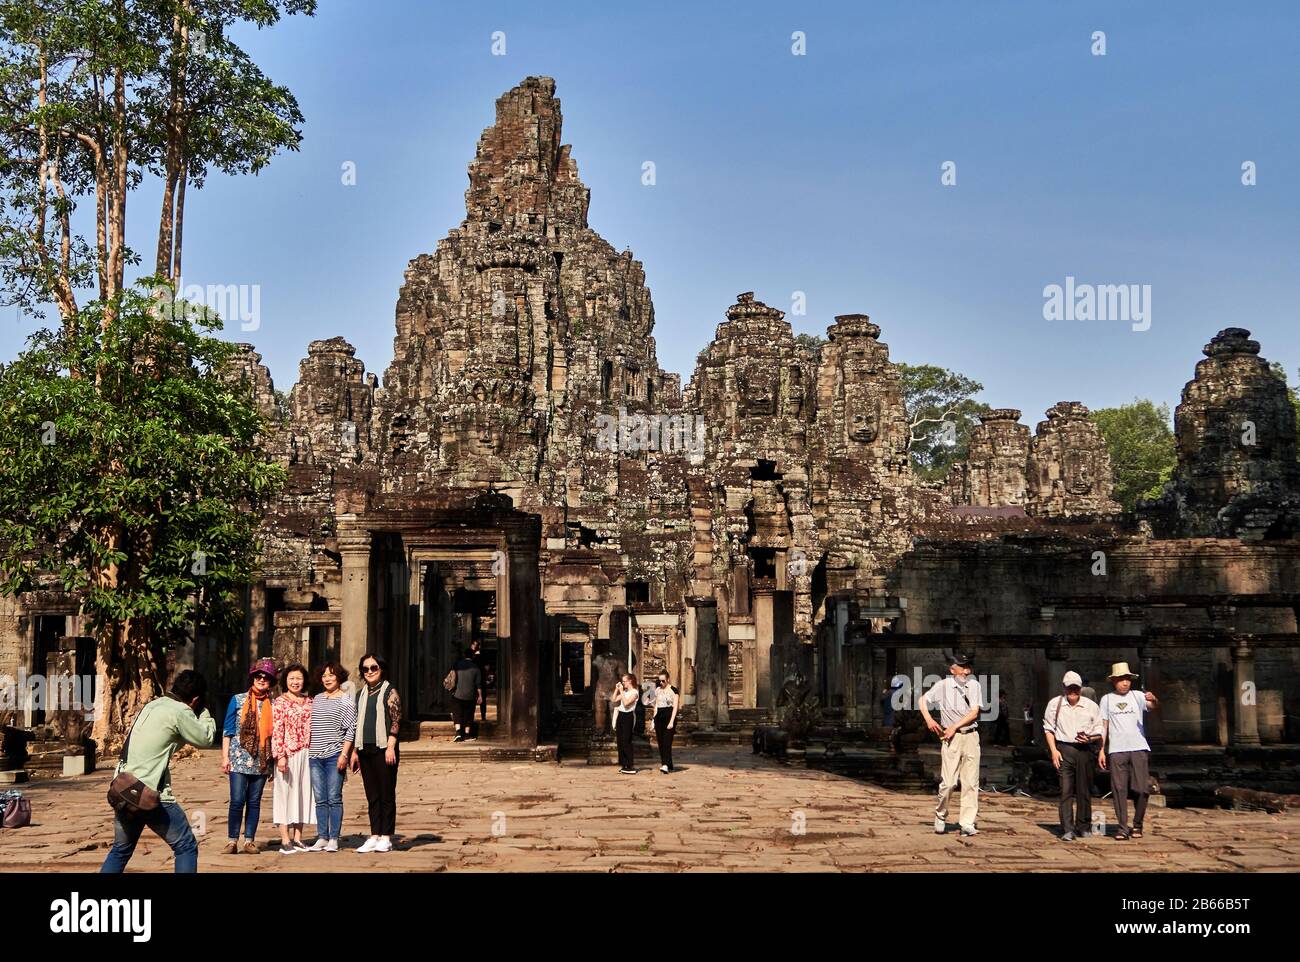 The magnificent Bayon Temple situated within the last capital city of the Khmer Empire - Angkor Thom. Its 54 gothic towers are decorated with 216 enormous smiling faces. Built in the late 12th or early 13th century as the official state temple of the King Jayavarman VII. Stock Photo